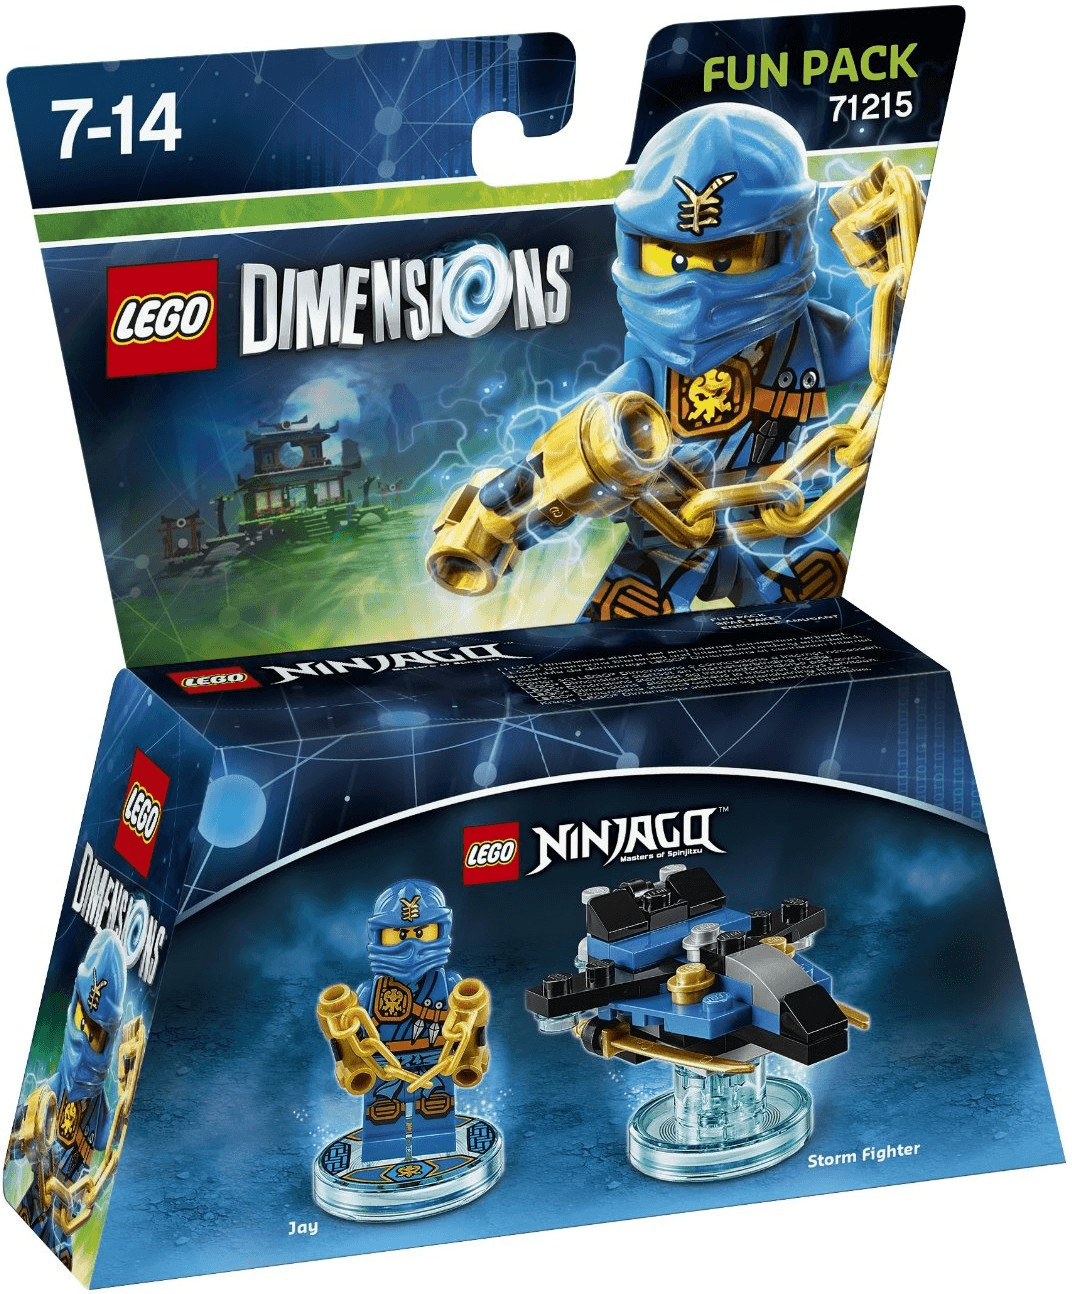 LEGO Dimensions: Fun Pack - Jay